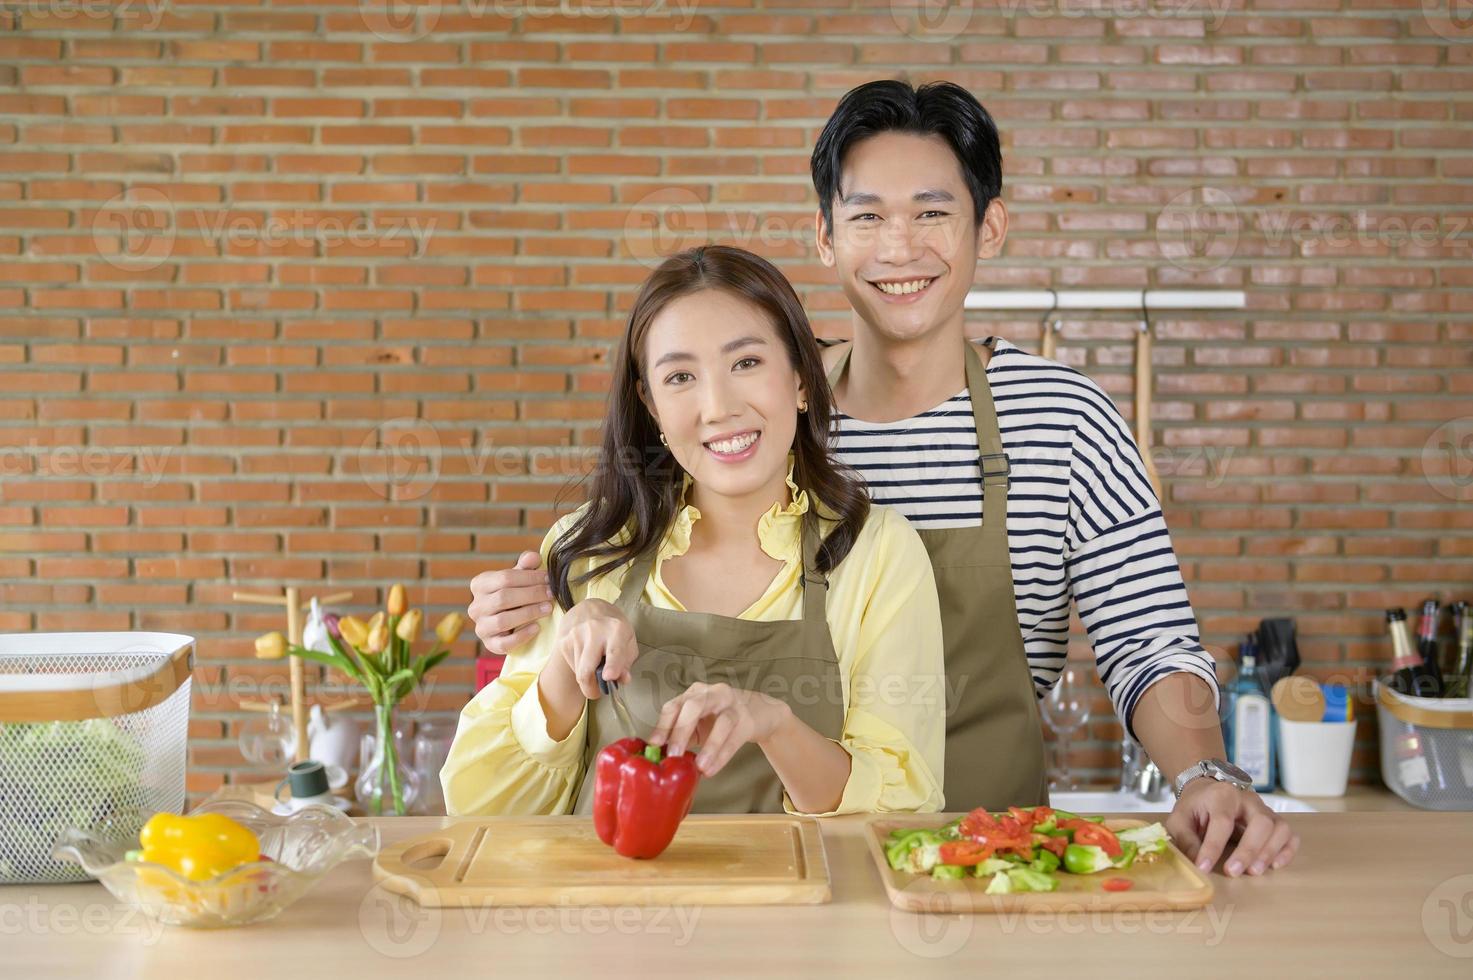 Young smiling asian couple wearing an apron in the kitchen room, cooking concept photo